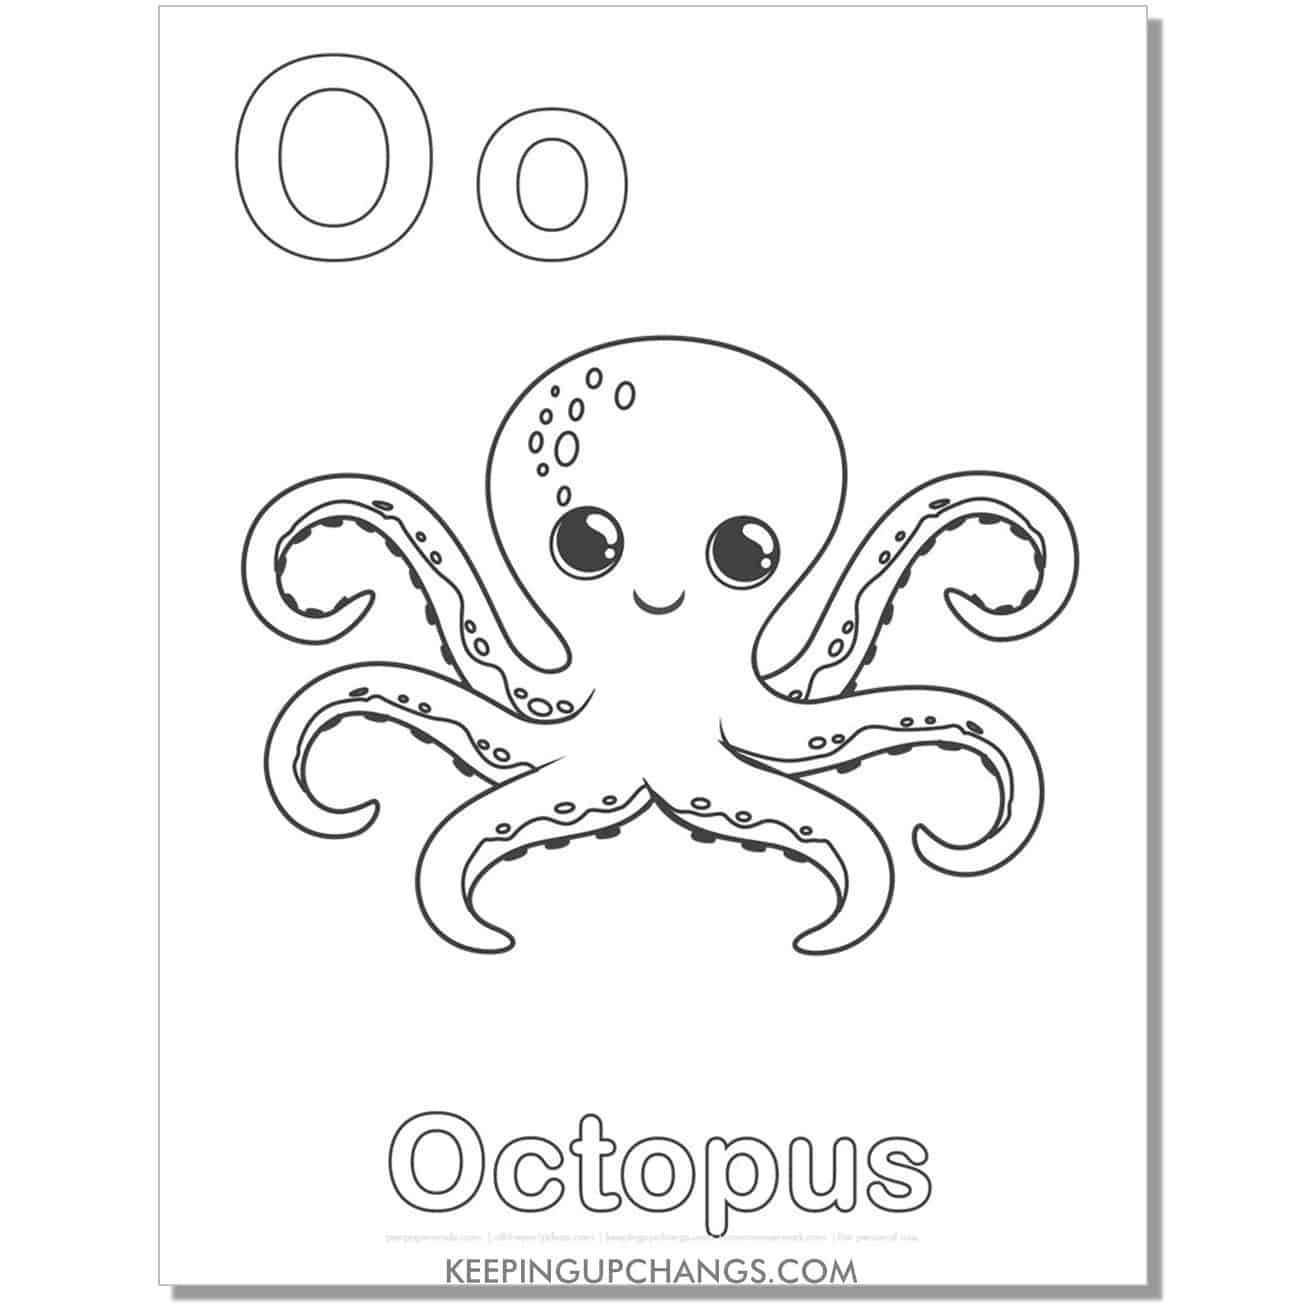 abc coloring sheet, o for octopus.